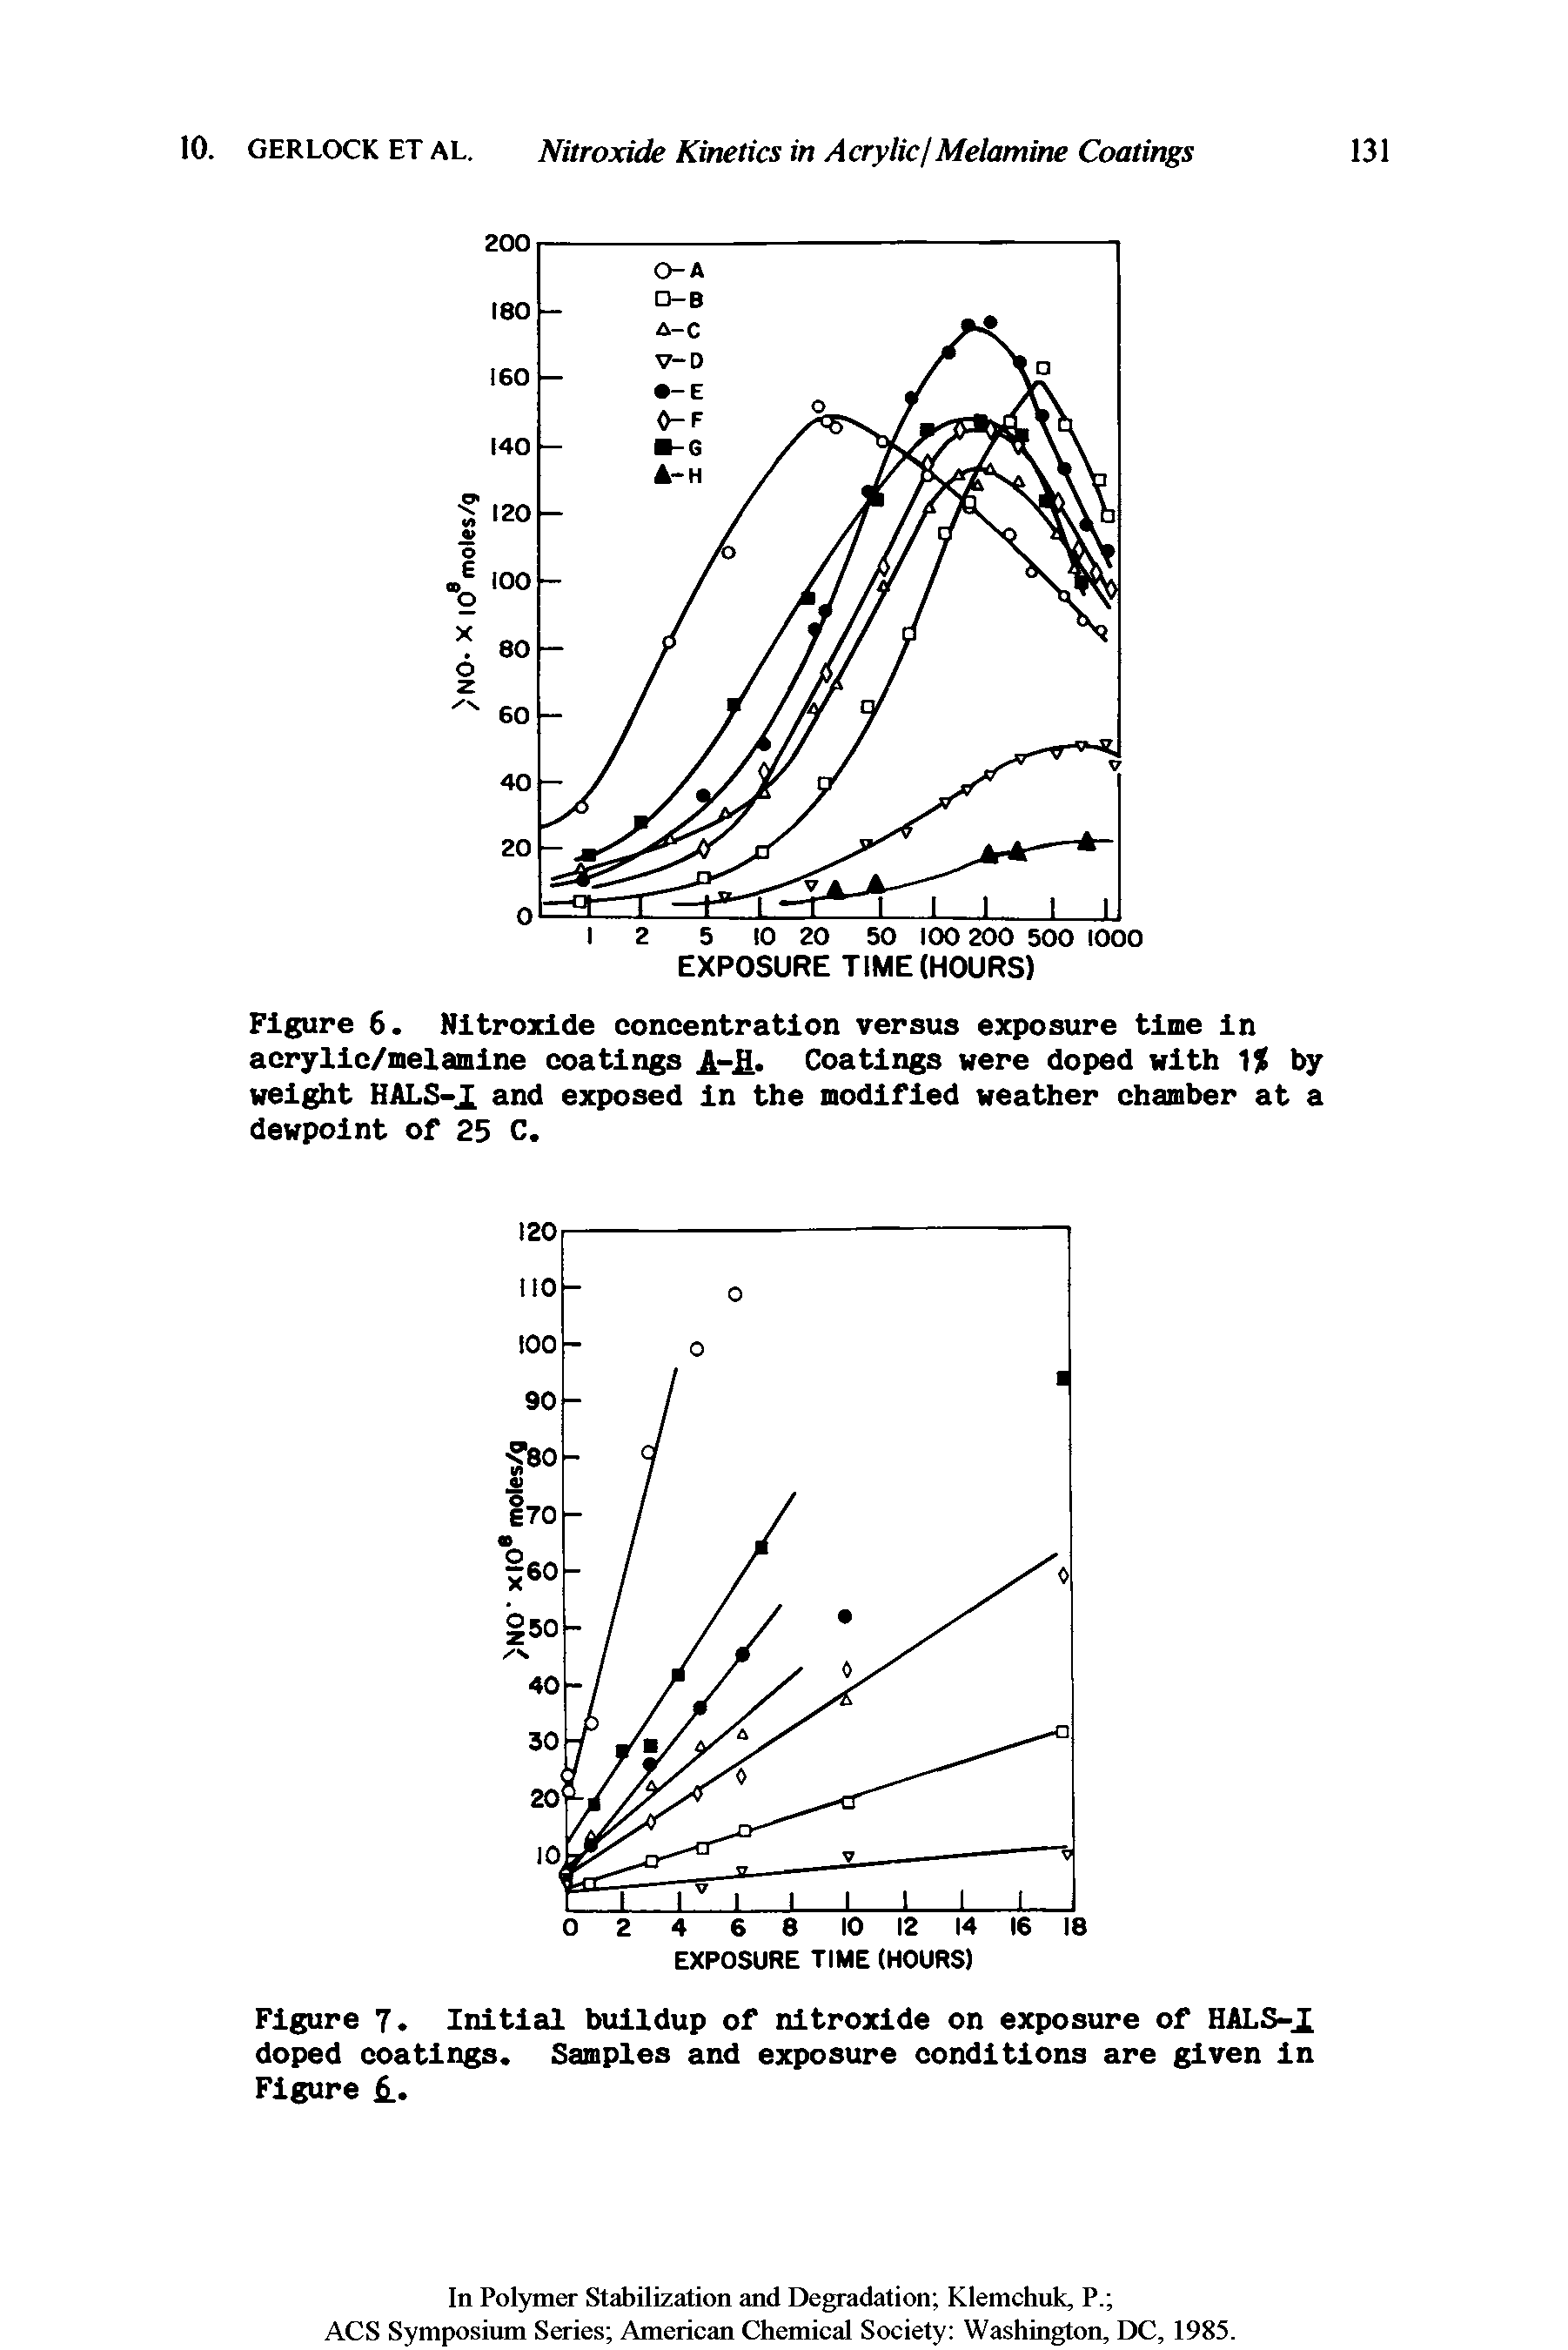 Figure 6. Nitroxide concentration versus exposure time in acrylic/melamine coatings A-Jl Coatings were doped with 1J by weight HALS-A and exposed in the modified weather chamber at a dewpoint of 25 C.